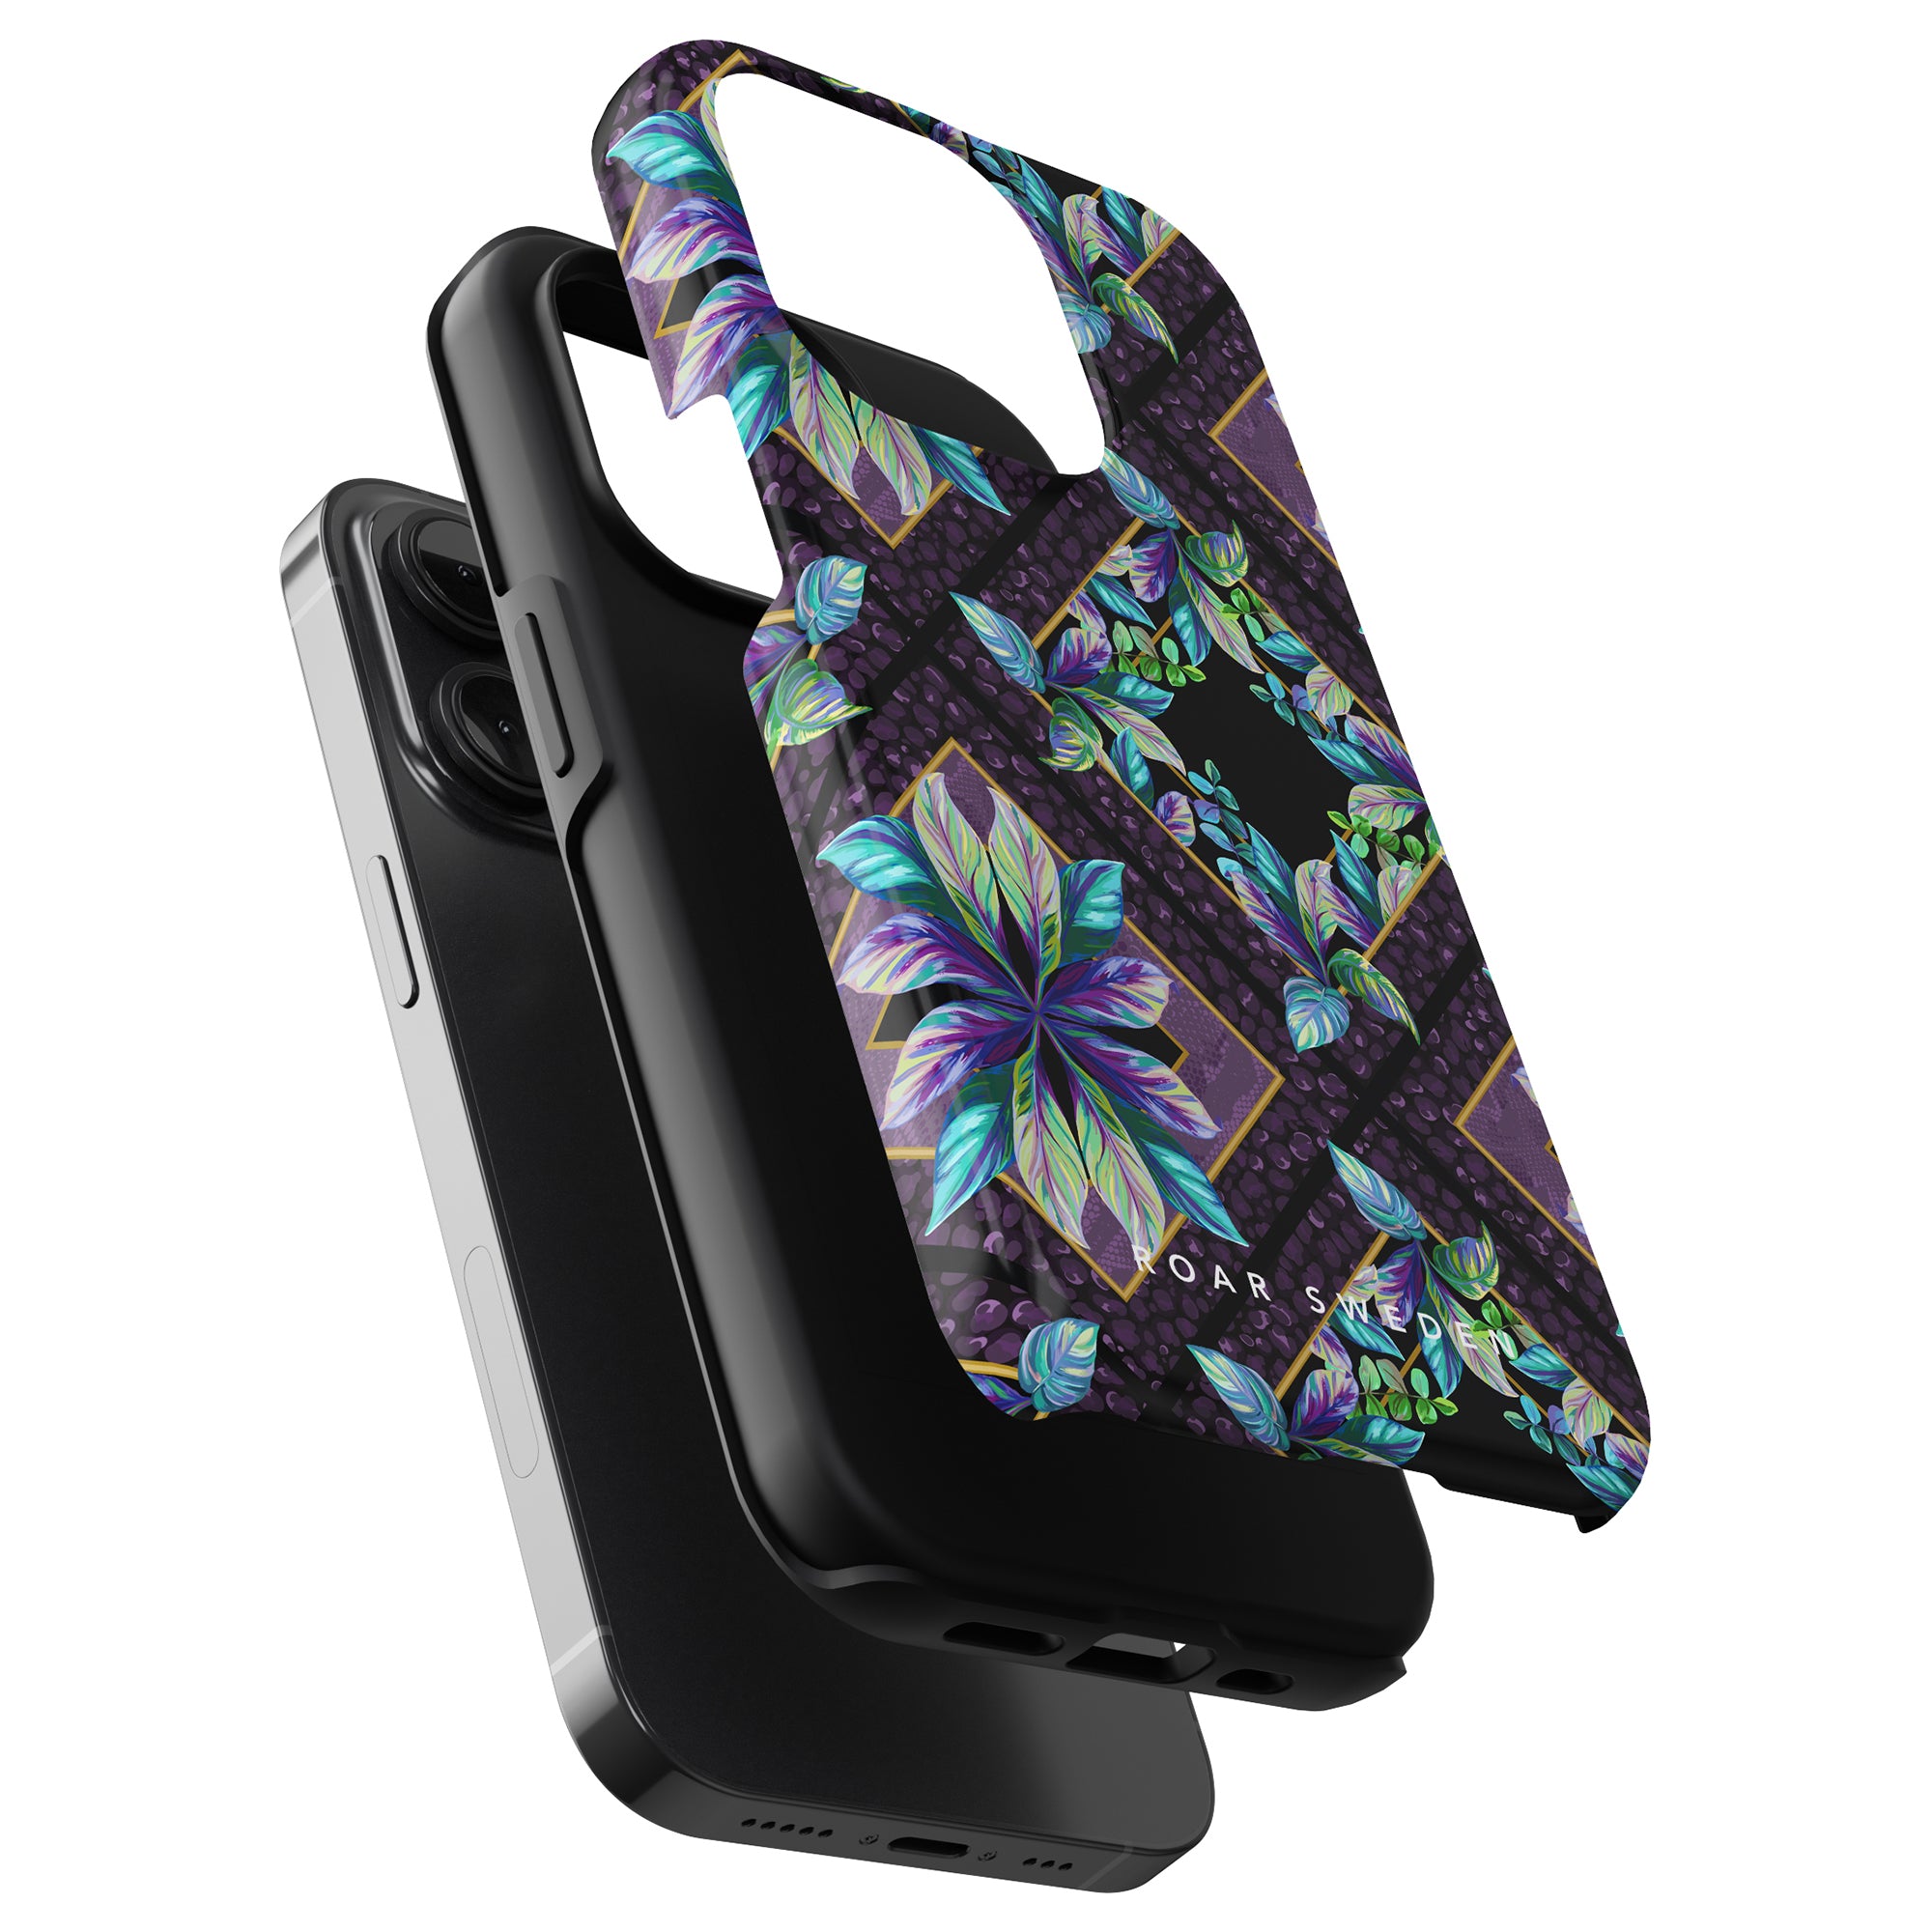 A smartphone with a Lush - Tough Case attached to a wireless charging dock.